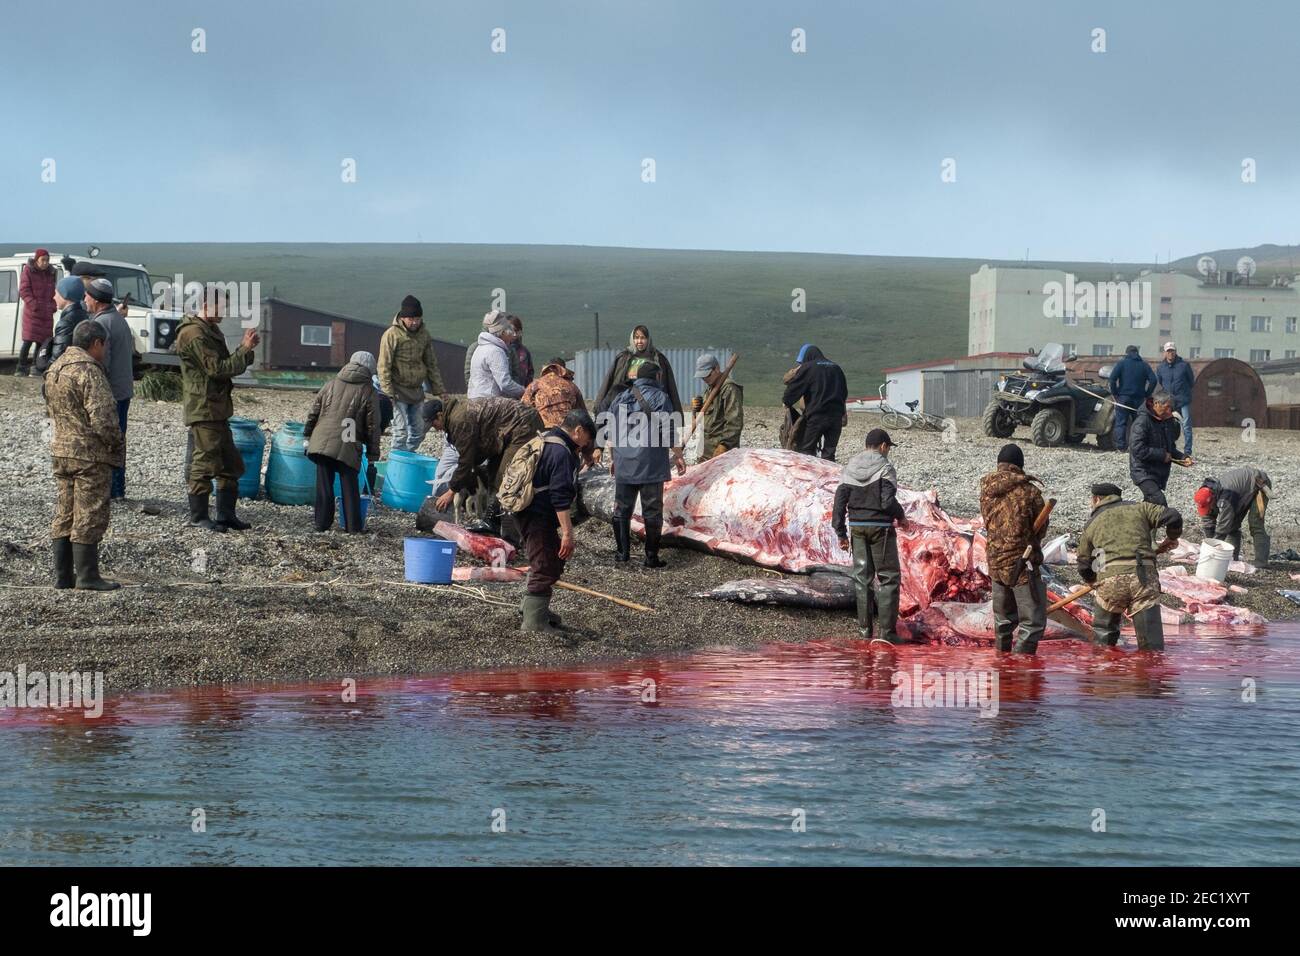 Lavrentiia, Chukotski region, Russia - August 5, 2020: The natives of Chukotka have caught a whale and are now cutting it into pieces. Stock Photo